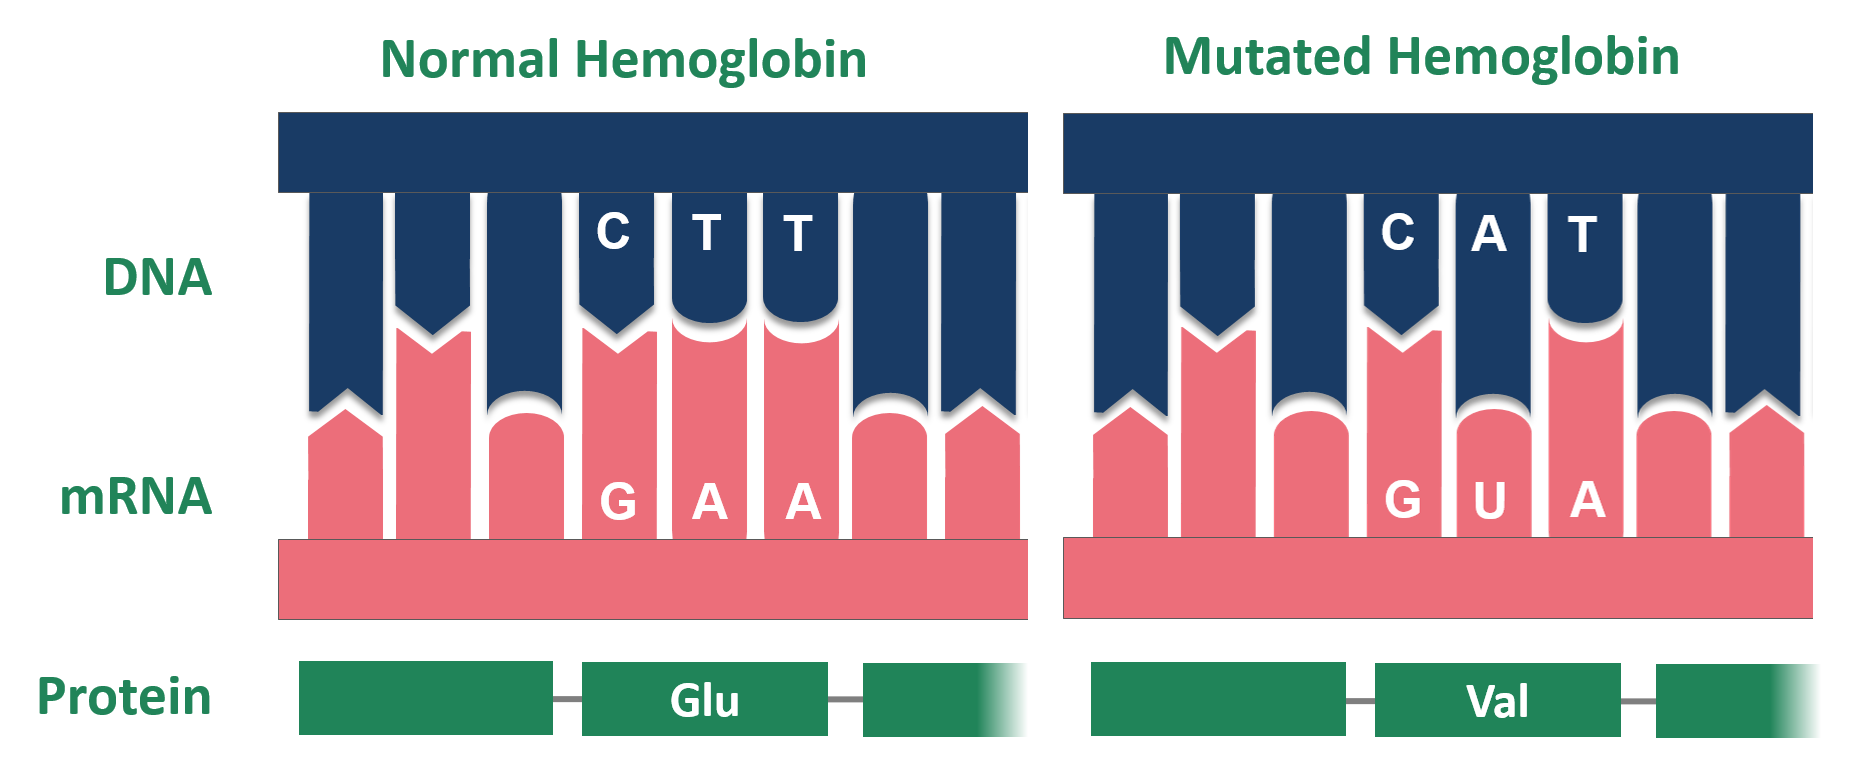 Mutation of Hemoglobin in patients with sickle cell anemia (Source: Wikipedia)